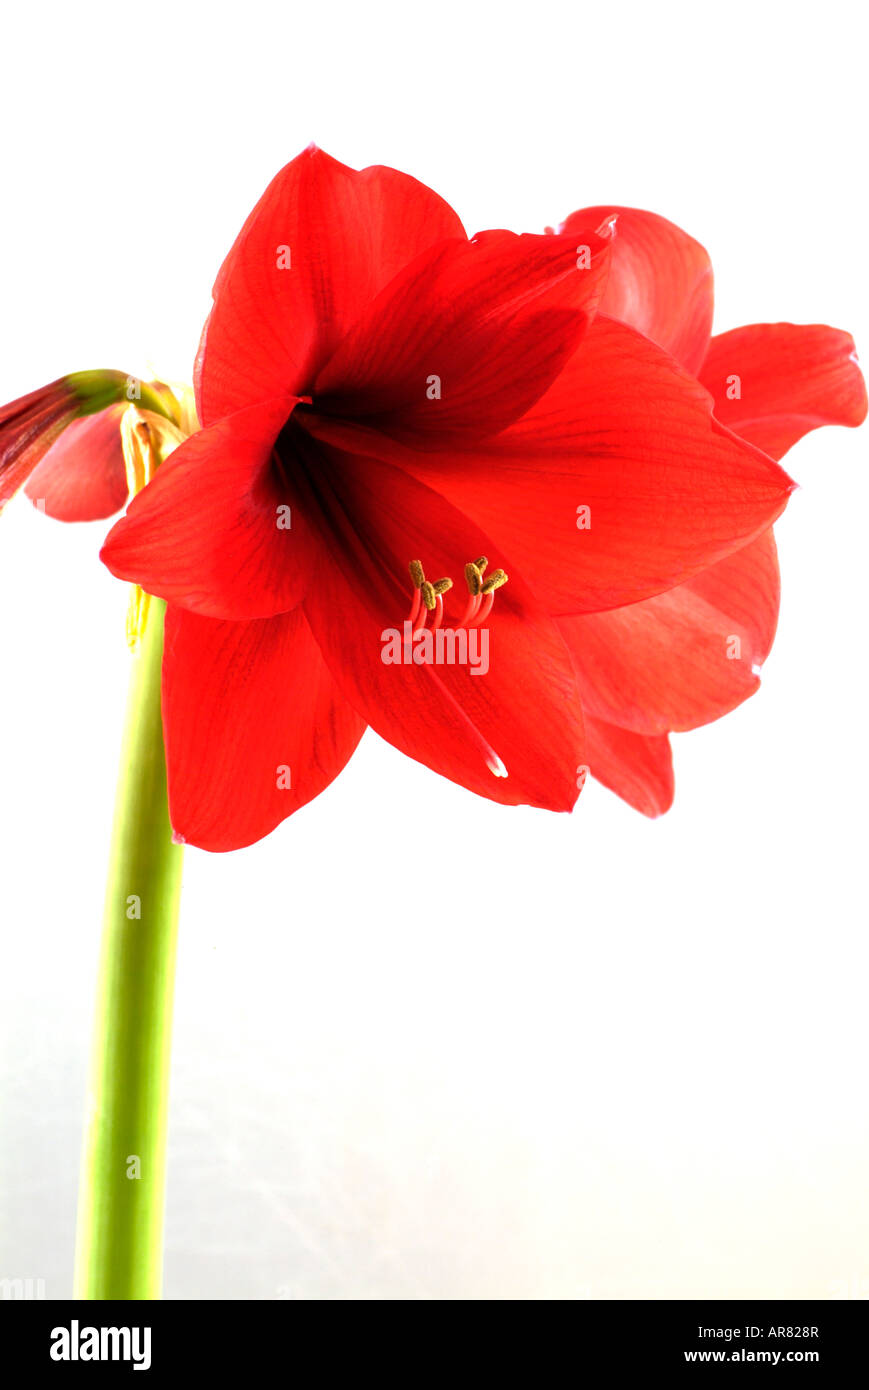 Cutout of red amaryllis or hippeastrum flowers against a white background Stock Photo